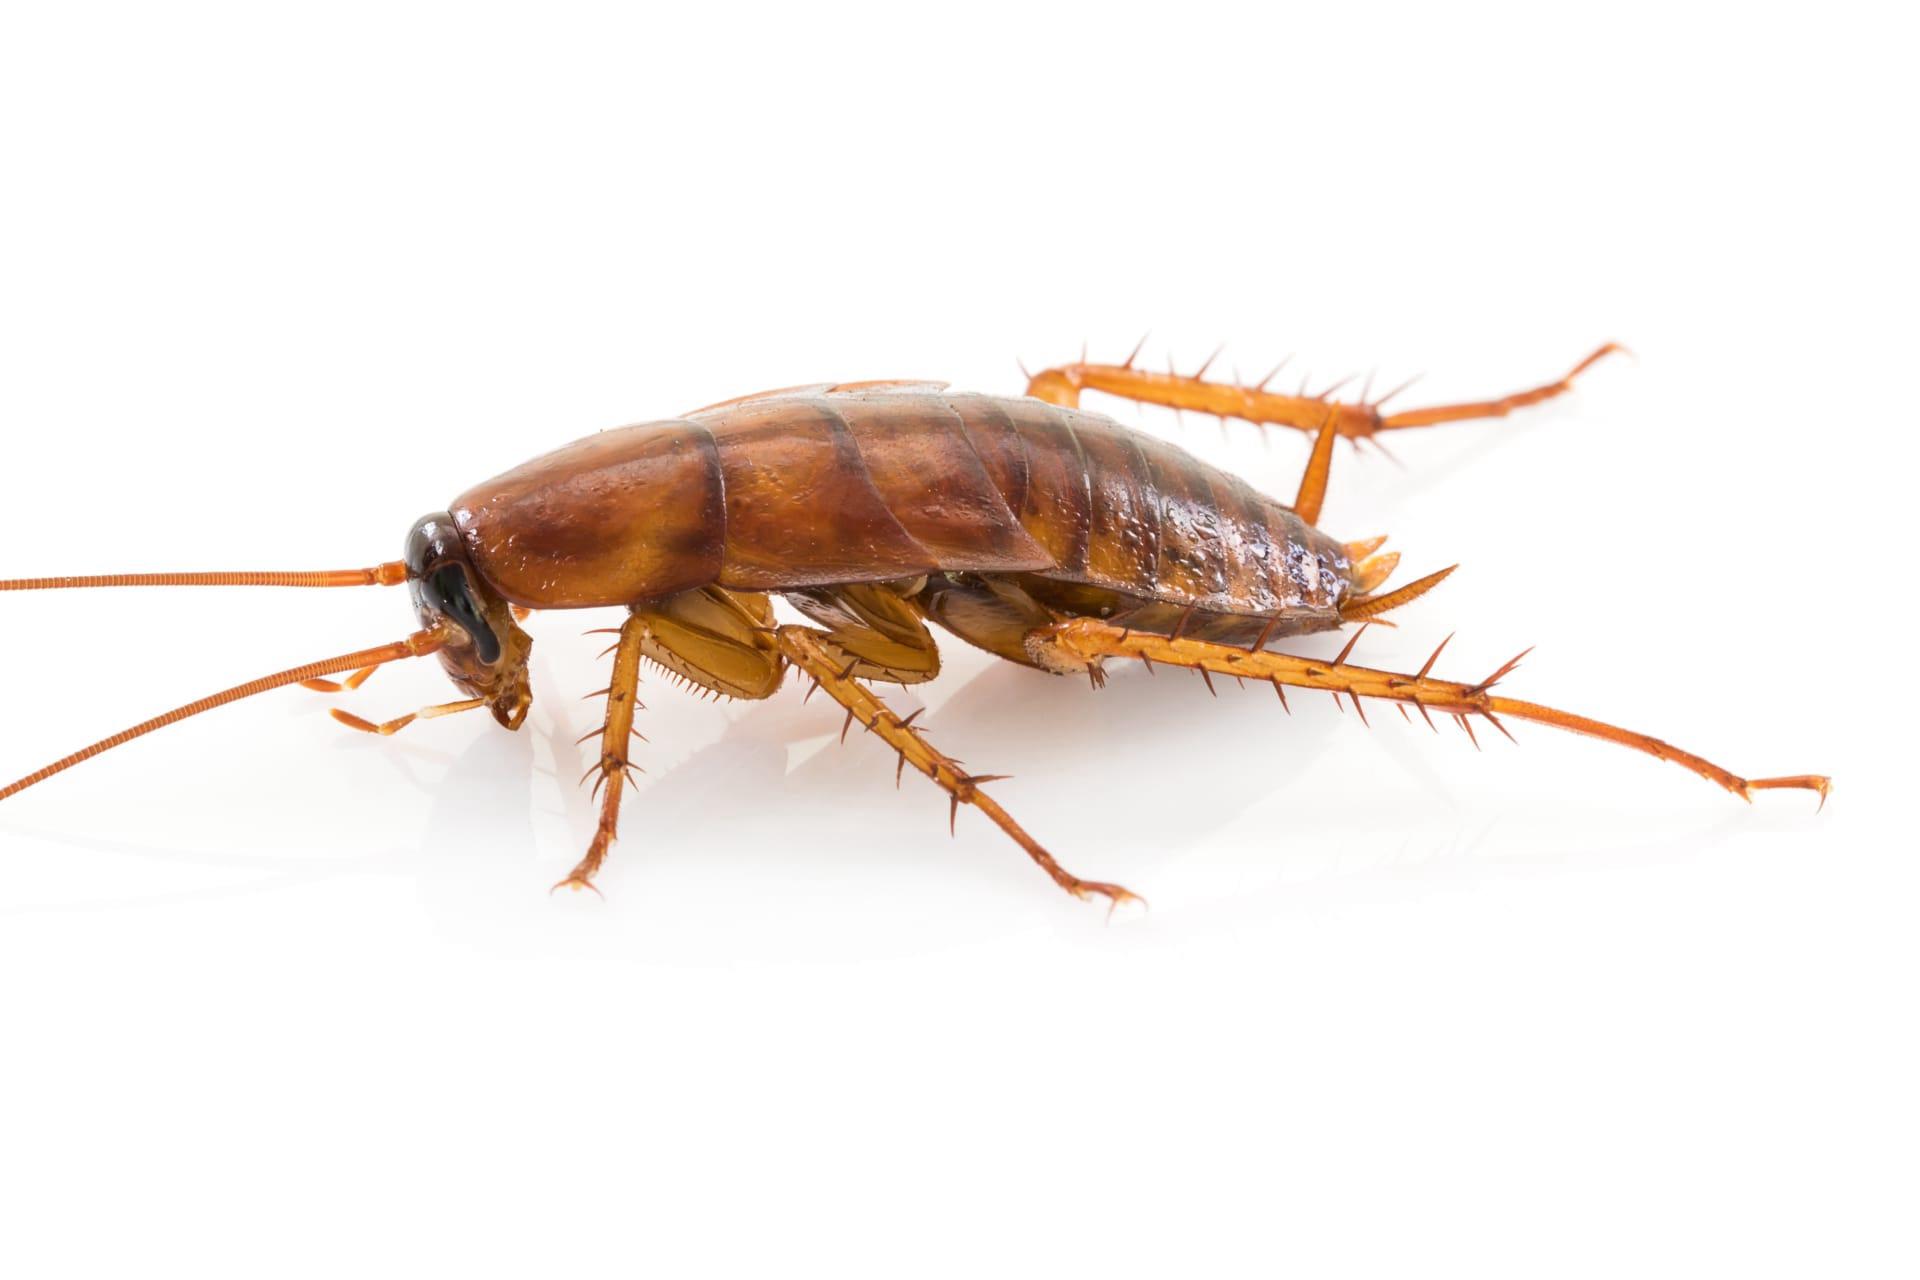 Cockroach pictures